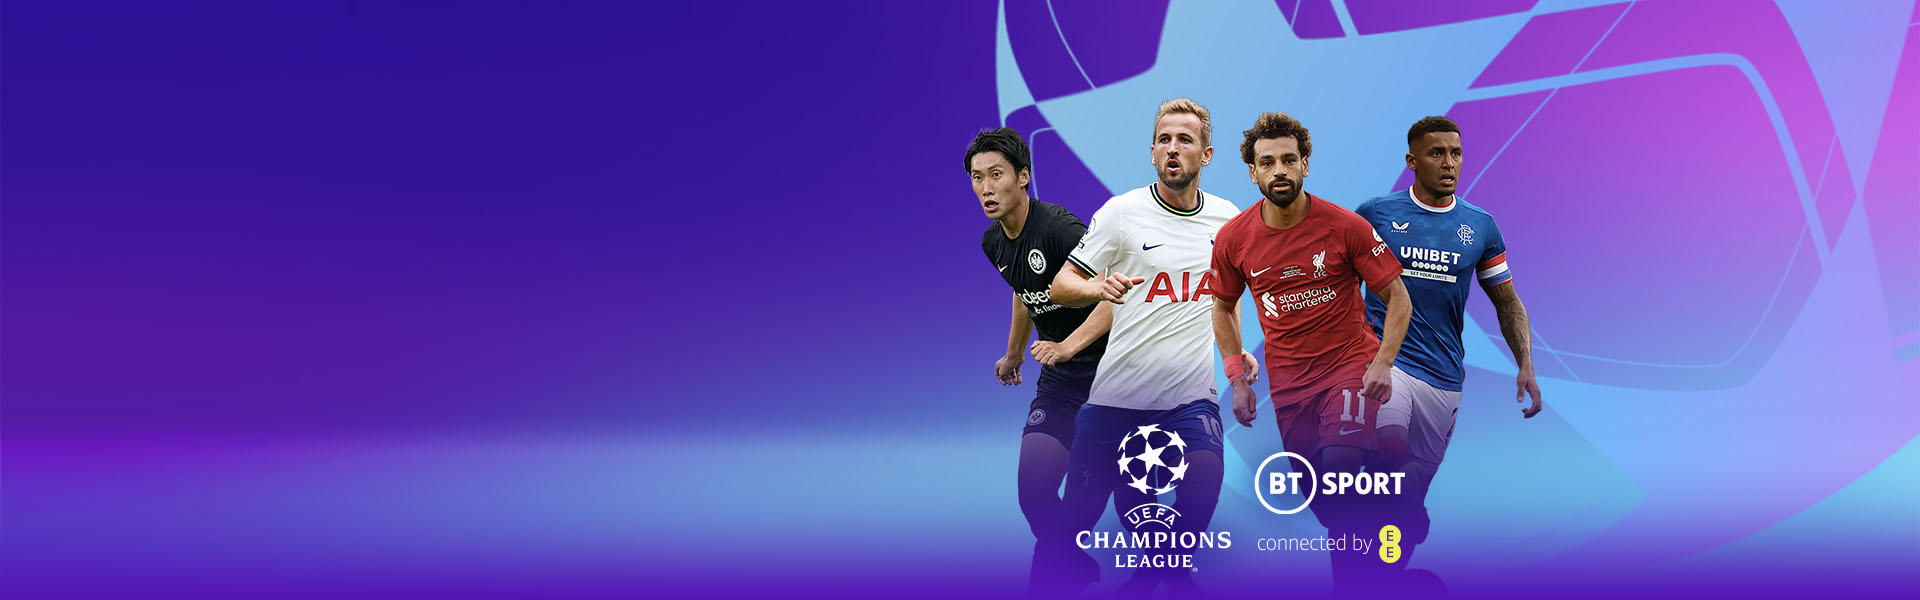 Watch the UEFA Champions League on BT Sport